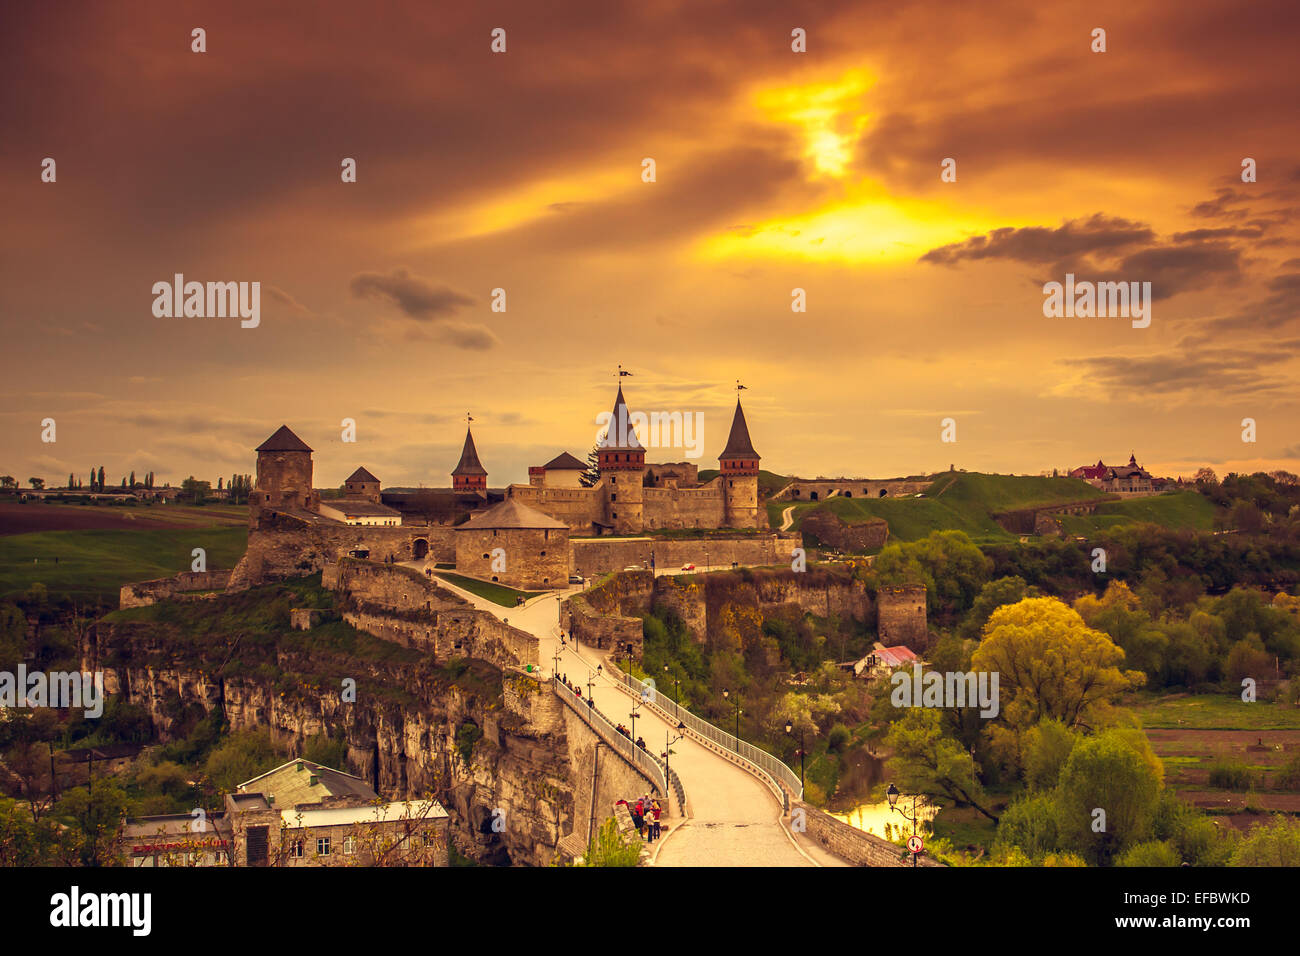 Château Kamianets-Podilskyi Banque D'Images